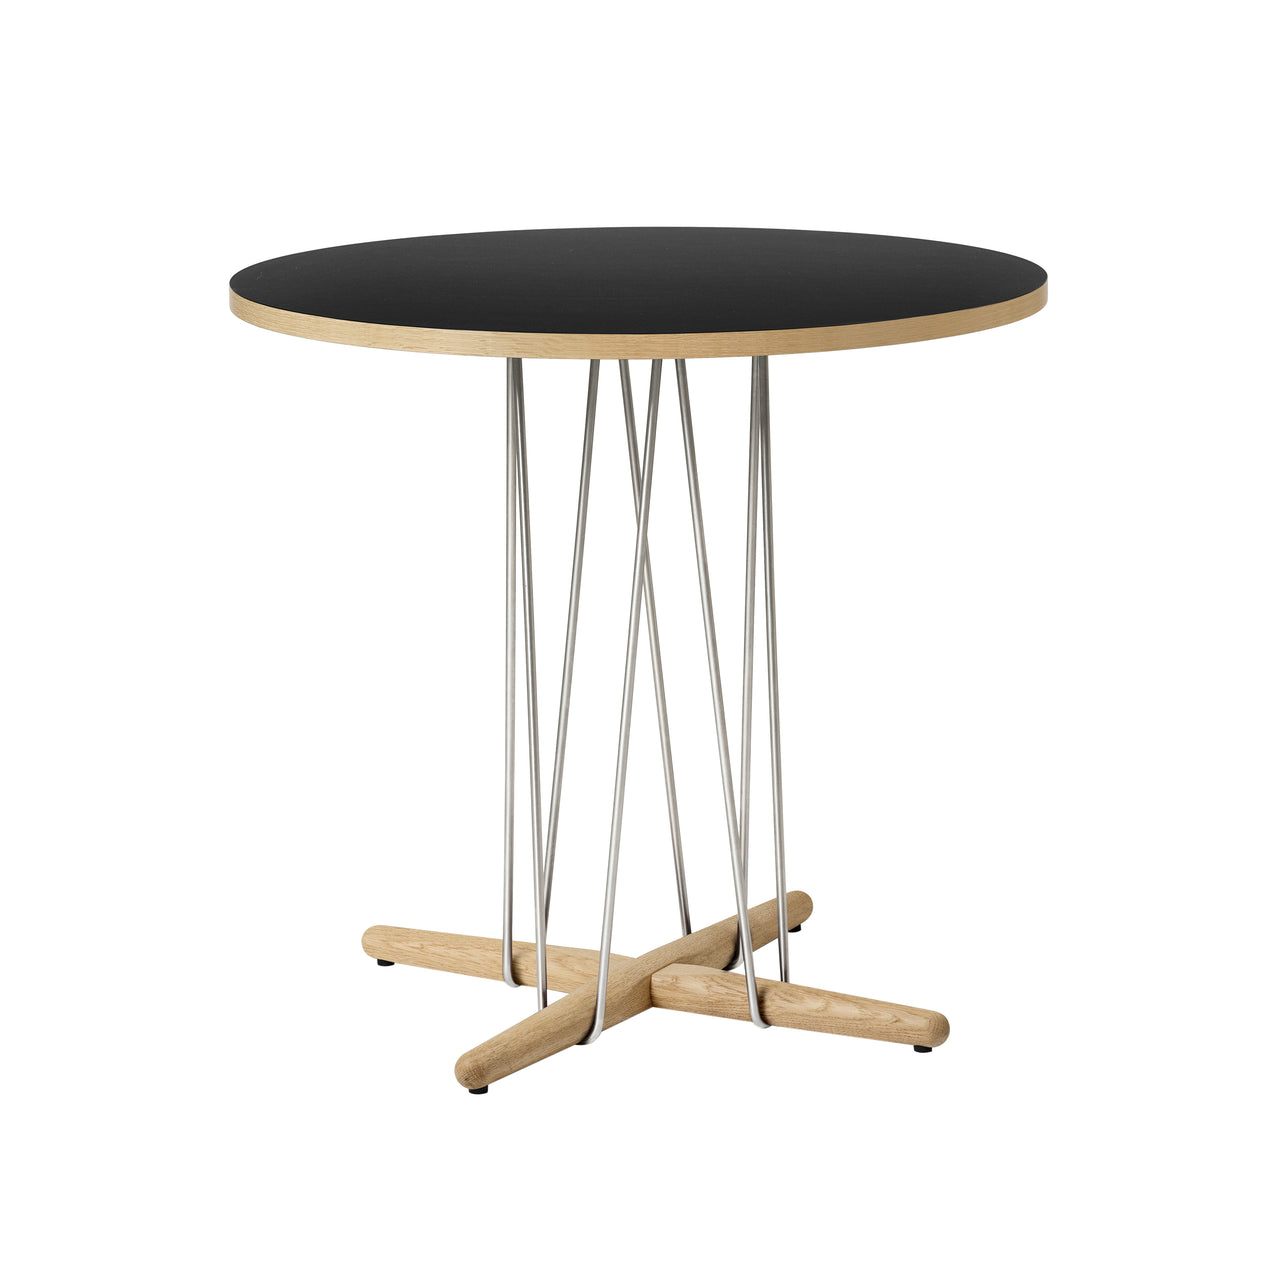 E020 Embrace Table: Stainless Steel + Small - 31.3